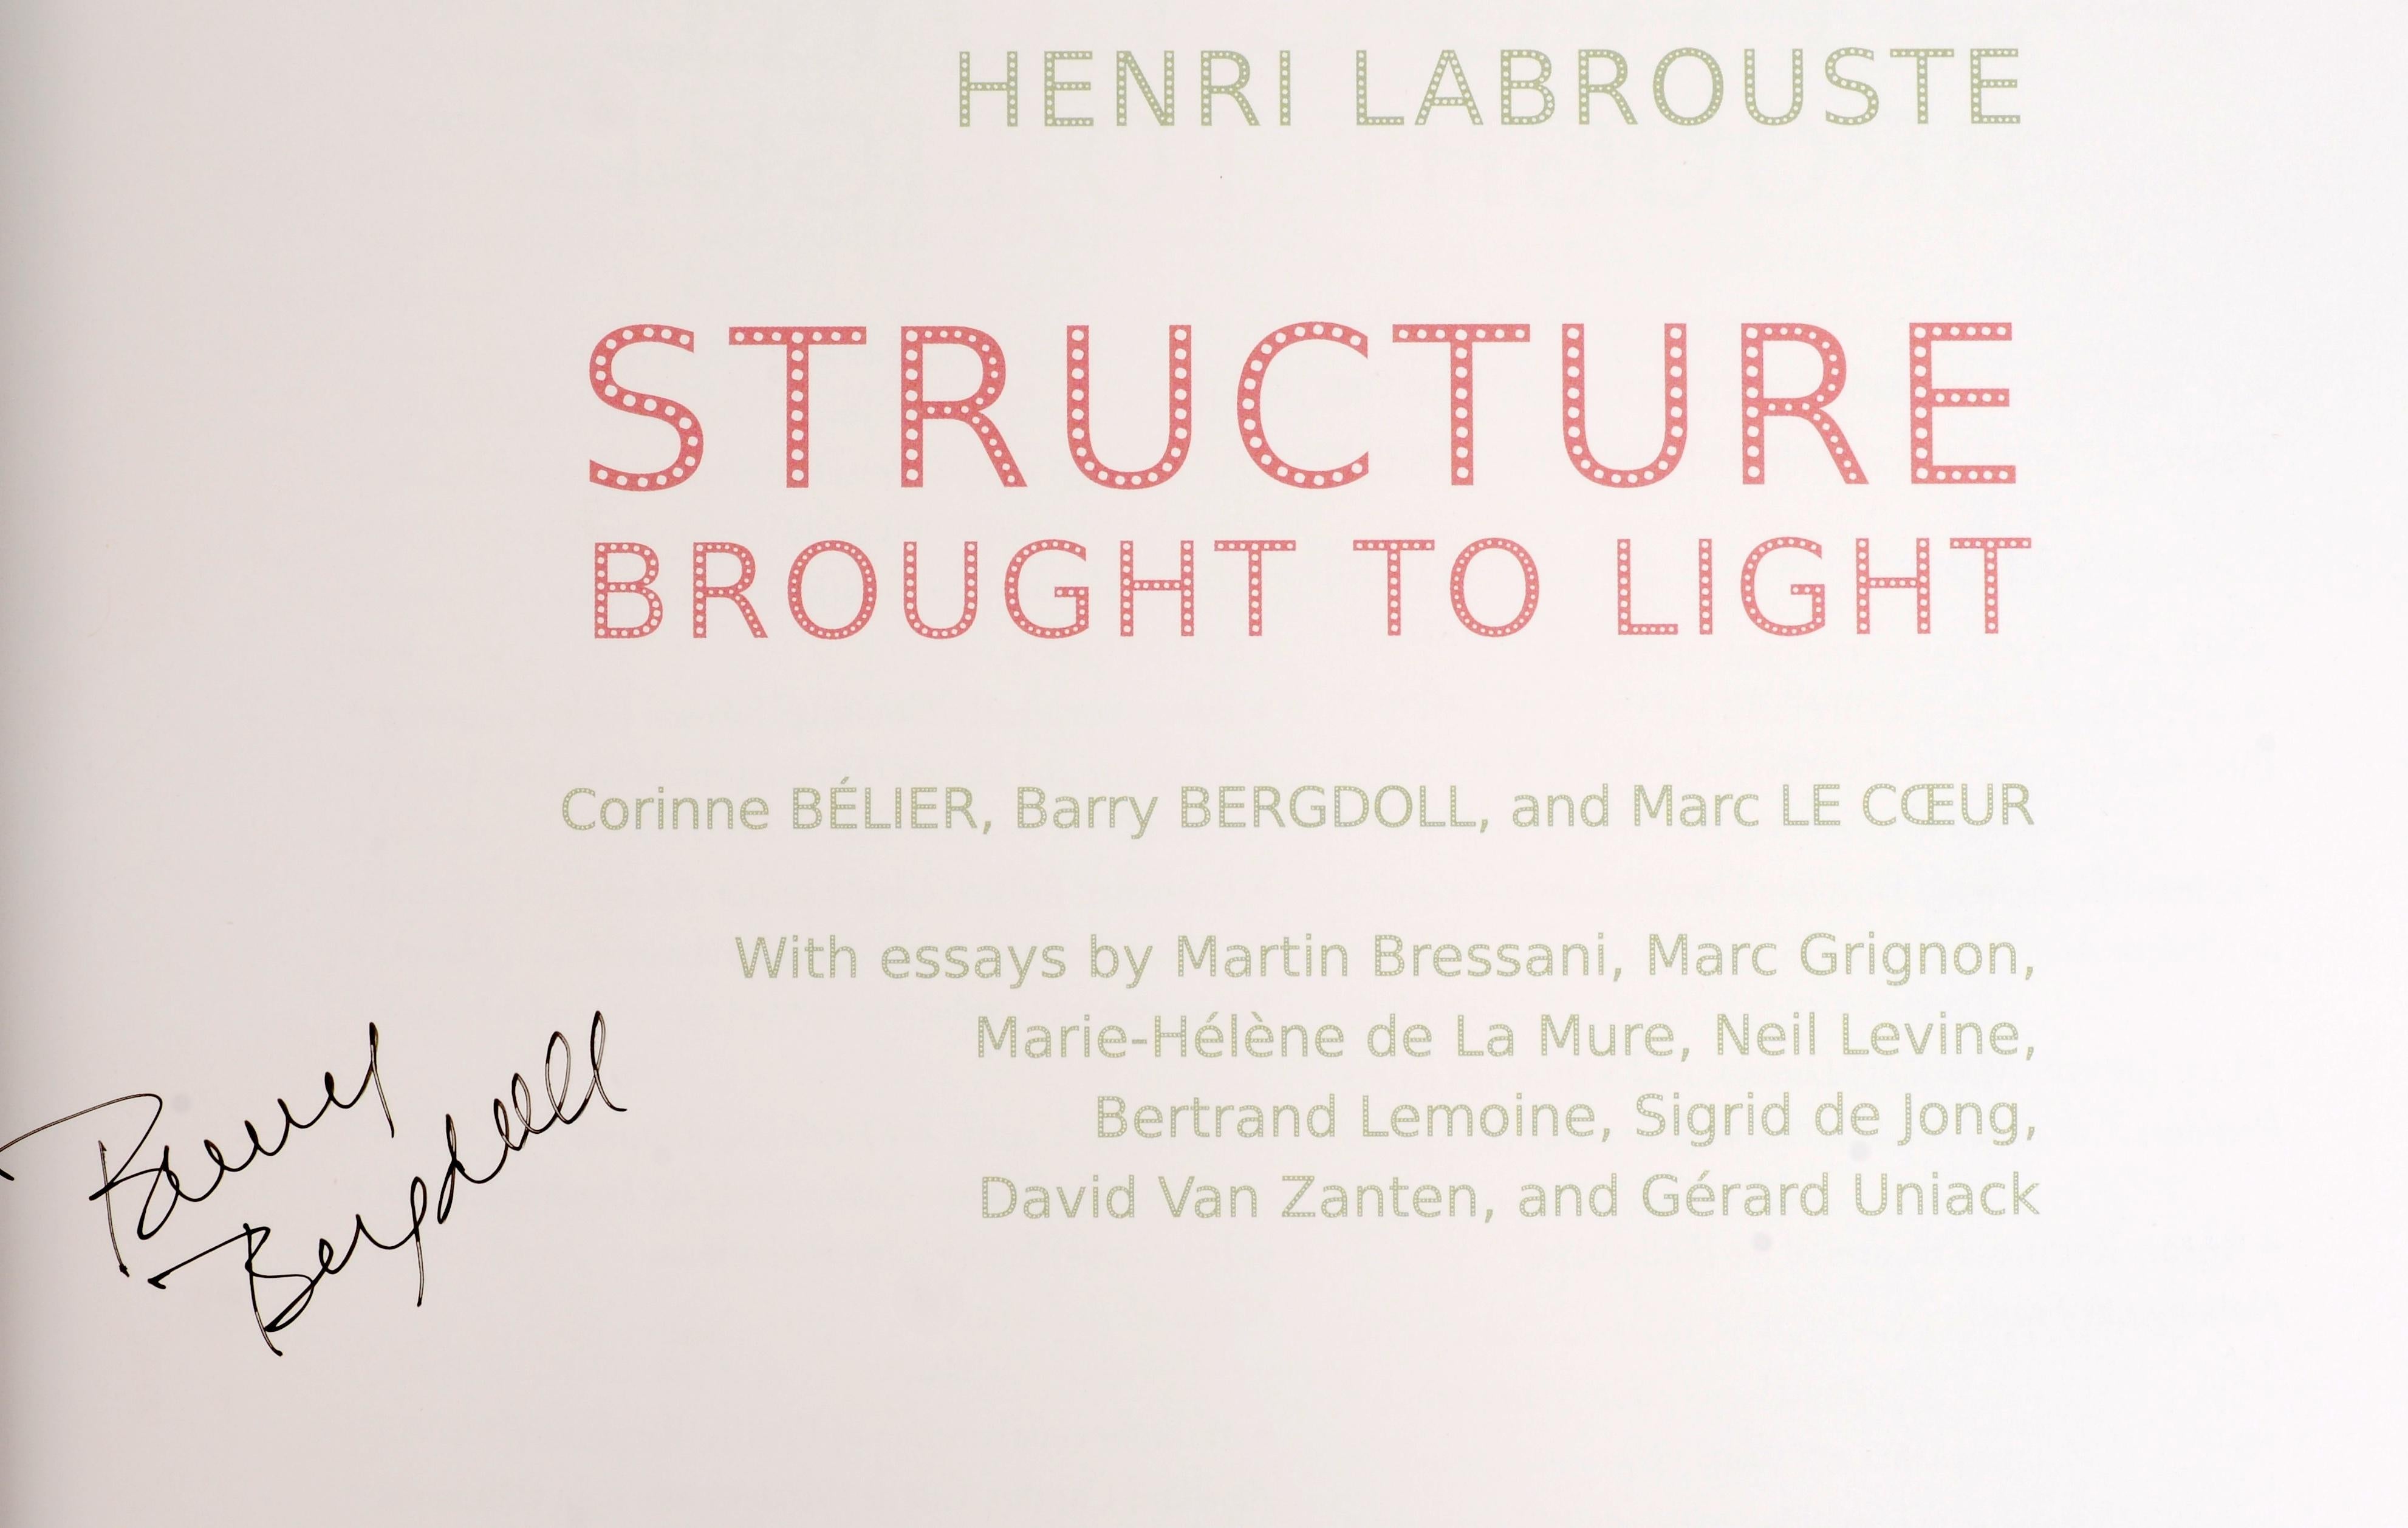 Henri Labrouste: Structure Brought to Light MOMA Mar 10–Jun 24, 2013 Exhibition Catalog. New York Museum of Modern Art 2012. Signed by the author, Barry Bergdoll, 1st Ed hardcover with dust jacket. This was the first solo exhibition of Labrouste’s